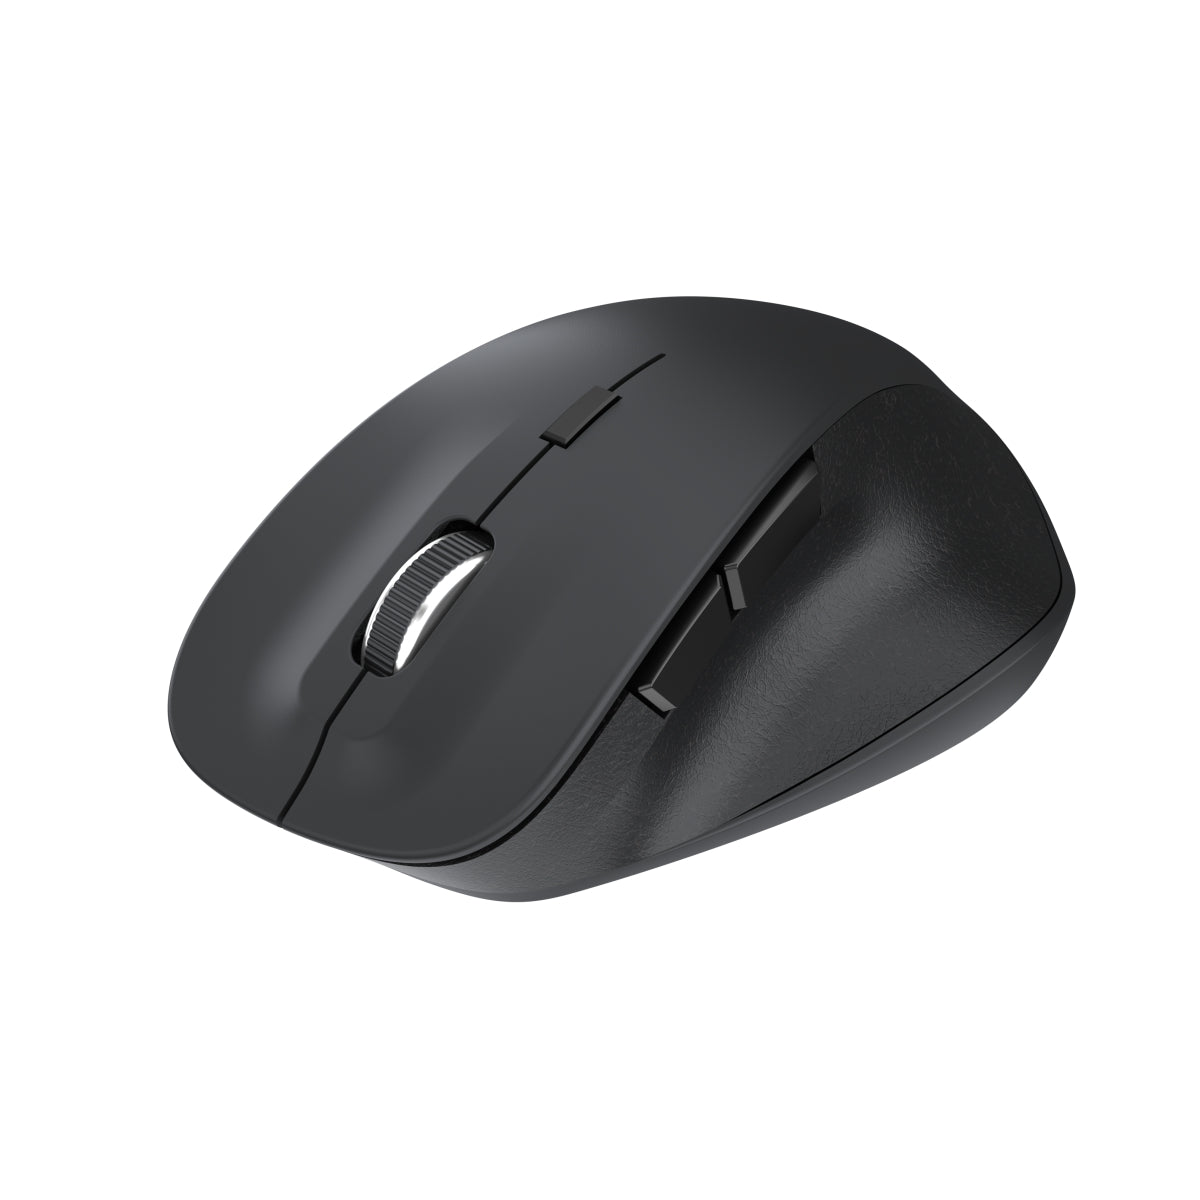 PORTRONICS-Toad 24 wireless mouse